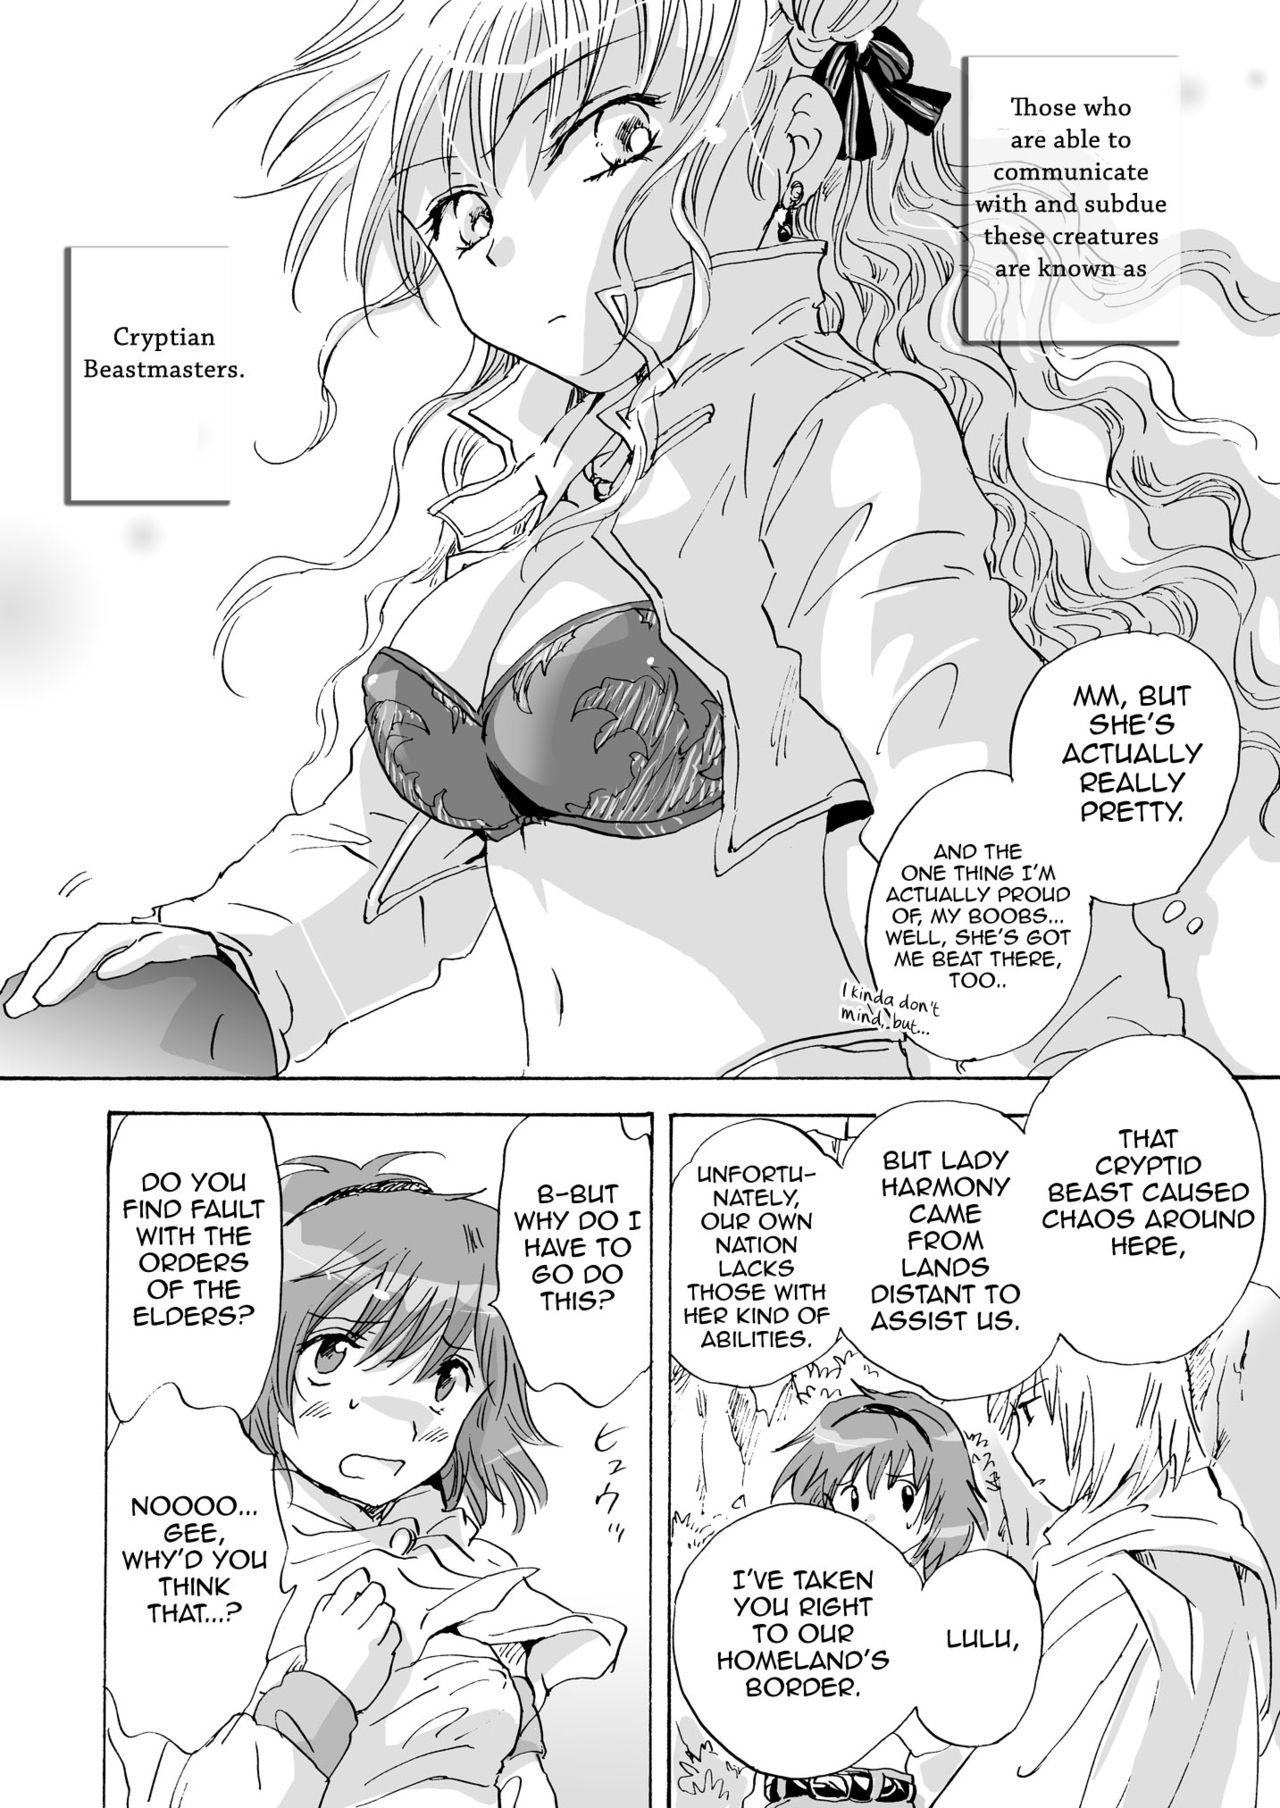 Pack Cutie Beast Complete Edition Ch. 1-6 Tittyfuck - Page 7